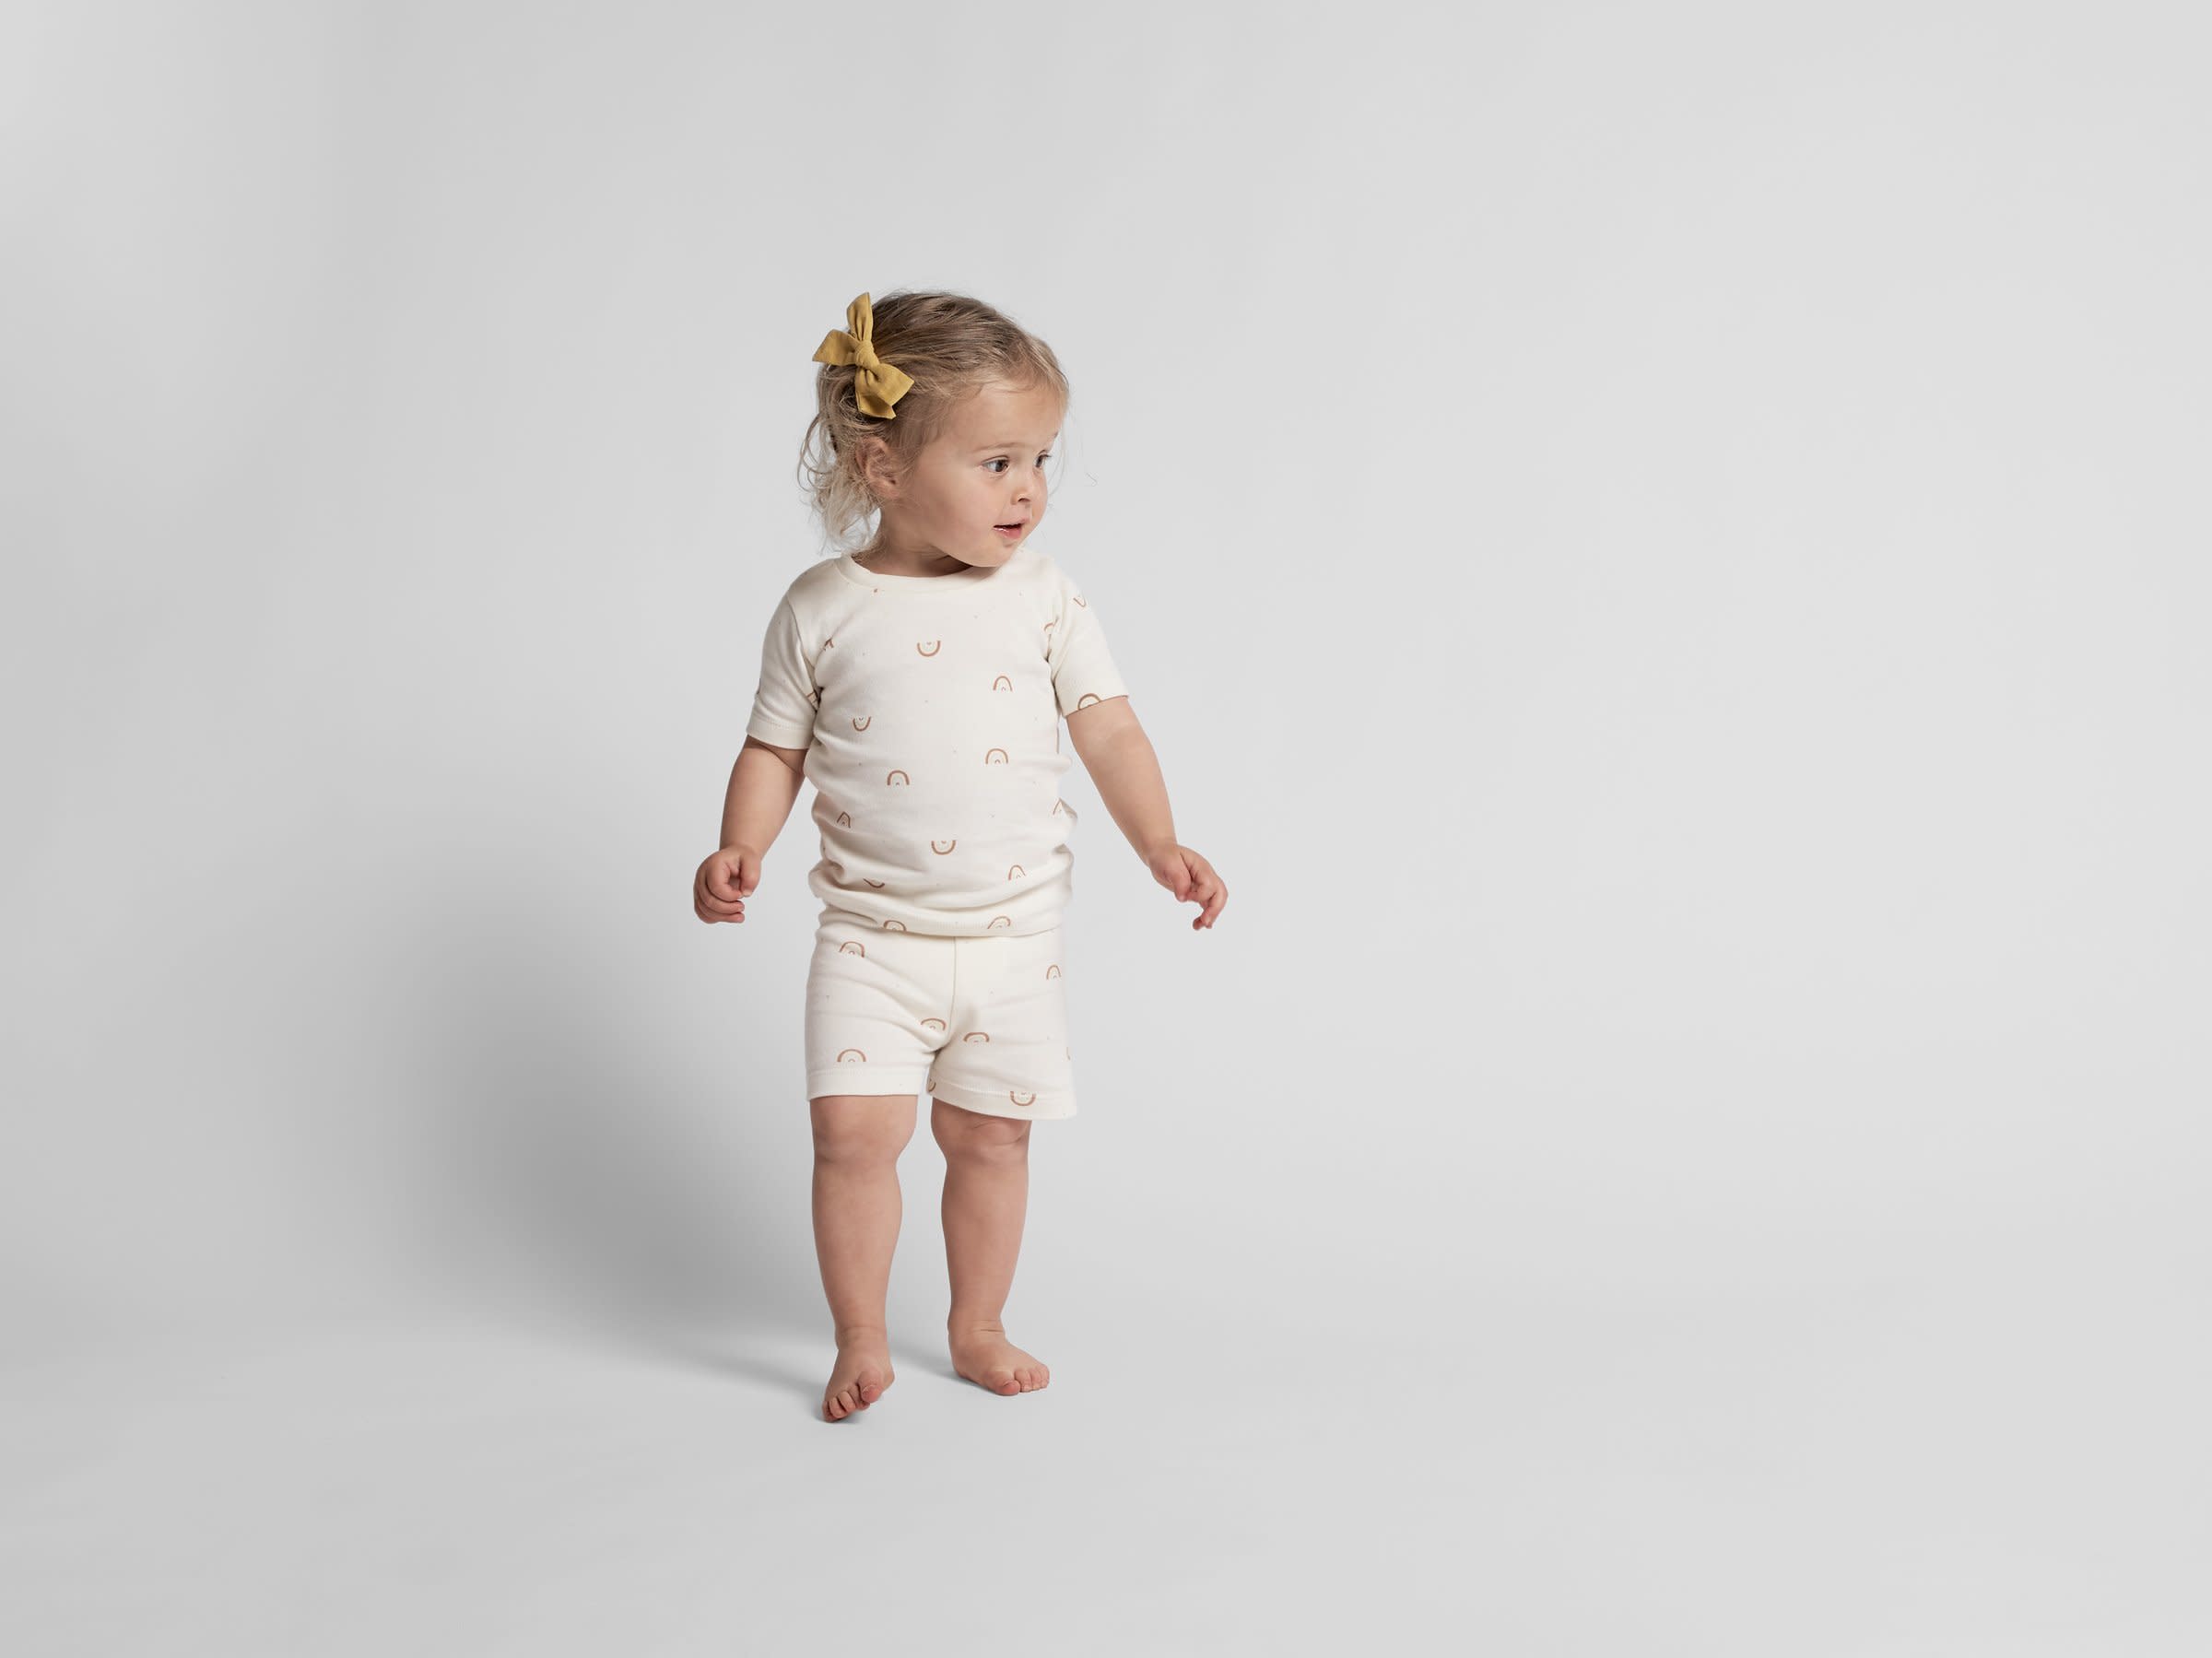 White Rainbow Pajama Set Shown In A Room